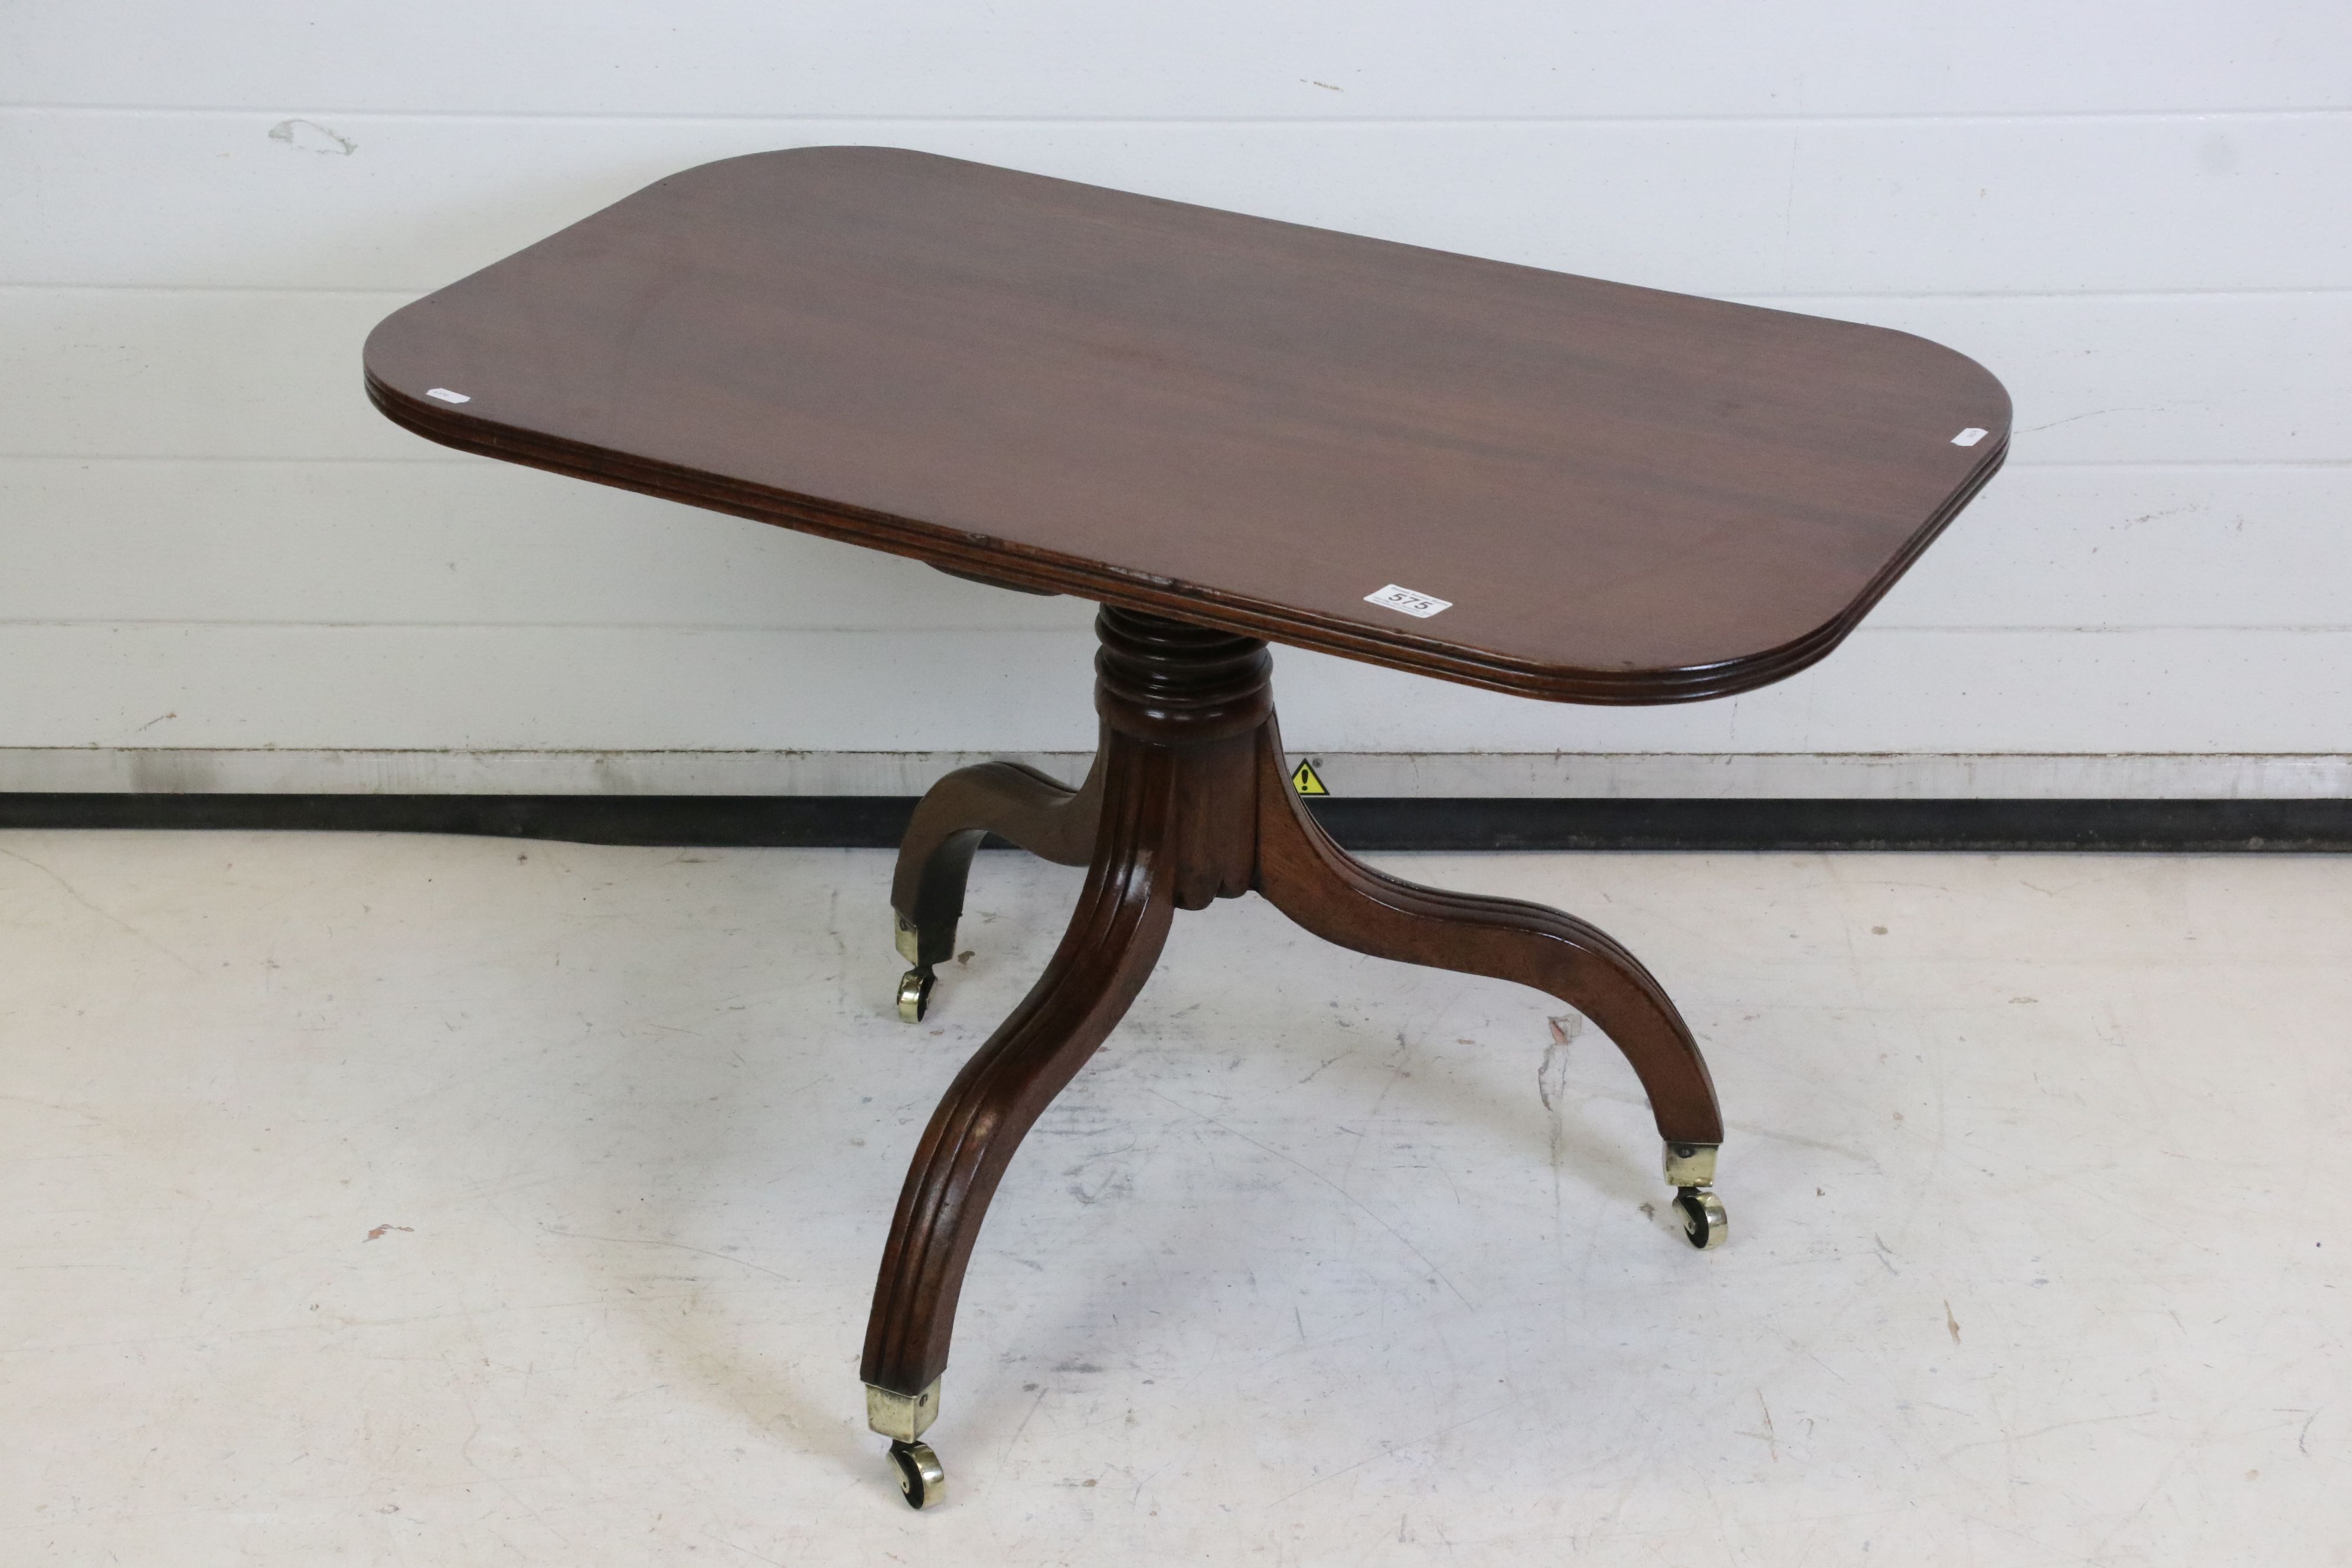 19th century Mahogany Rectangular Low Table raised on a turned column and three splay legs with